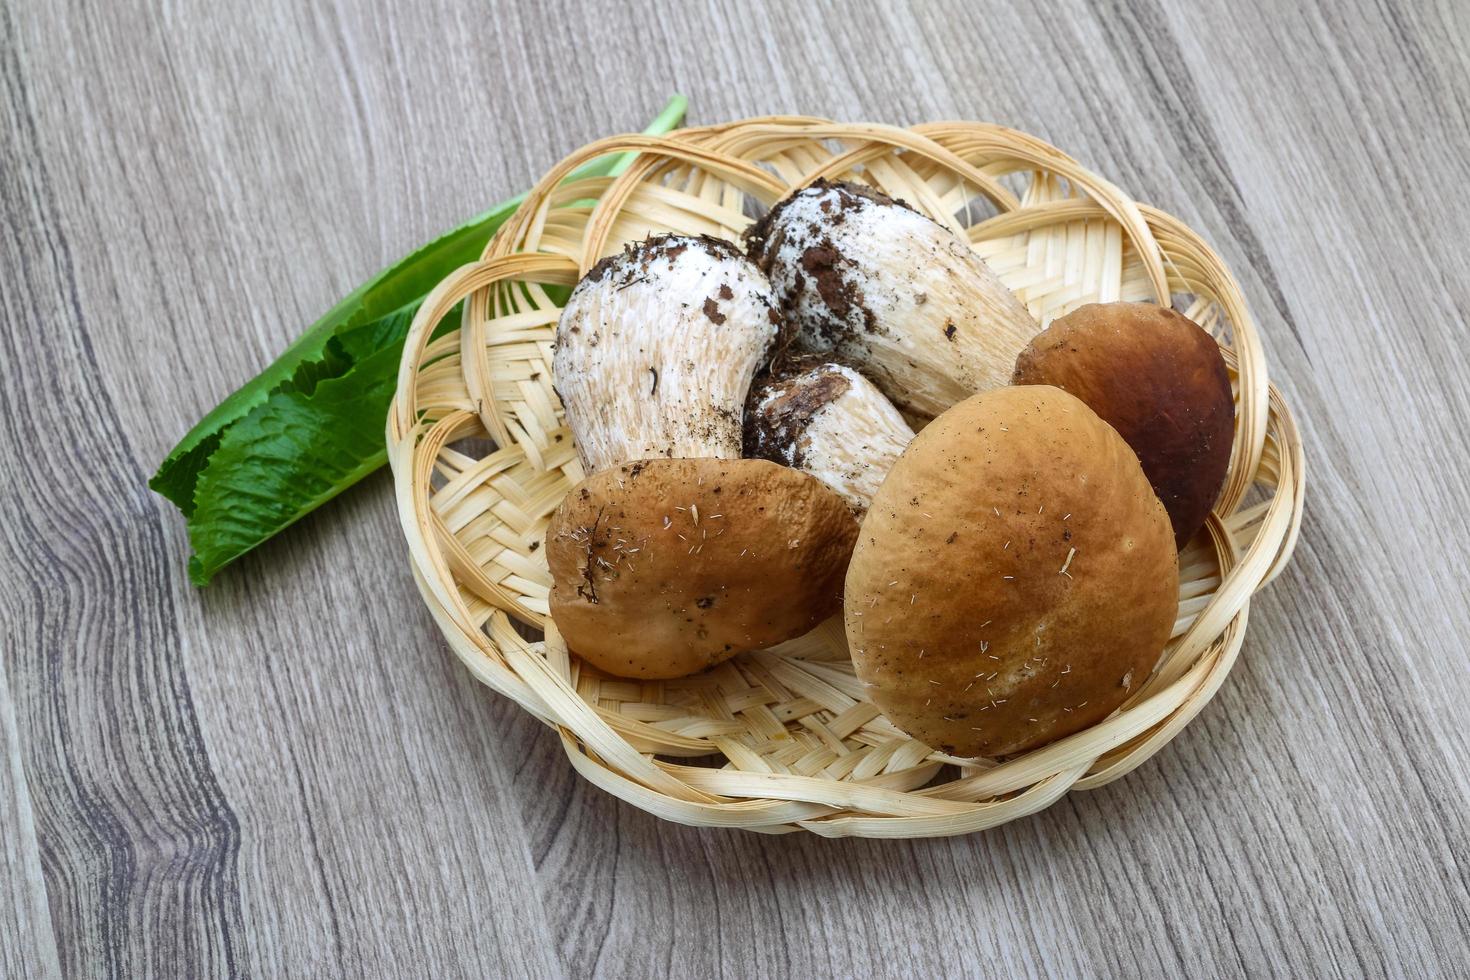 Wild Mushrooms in a basket on wooden background photo